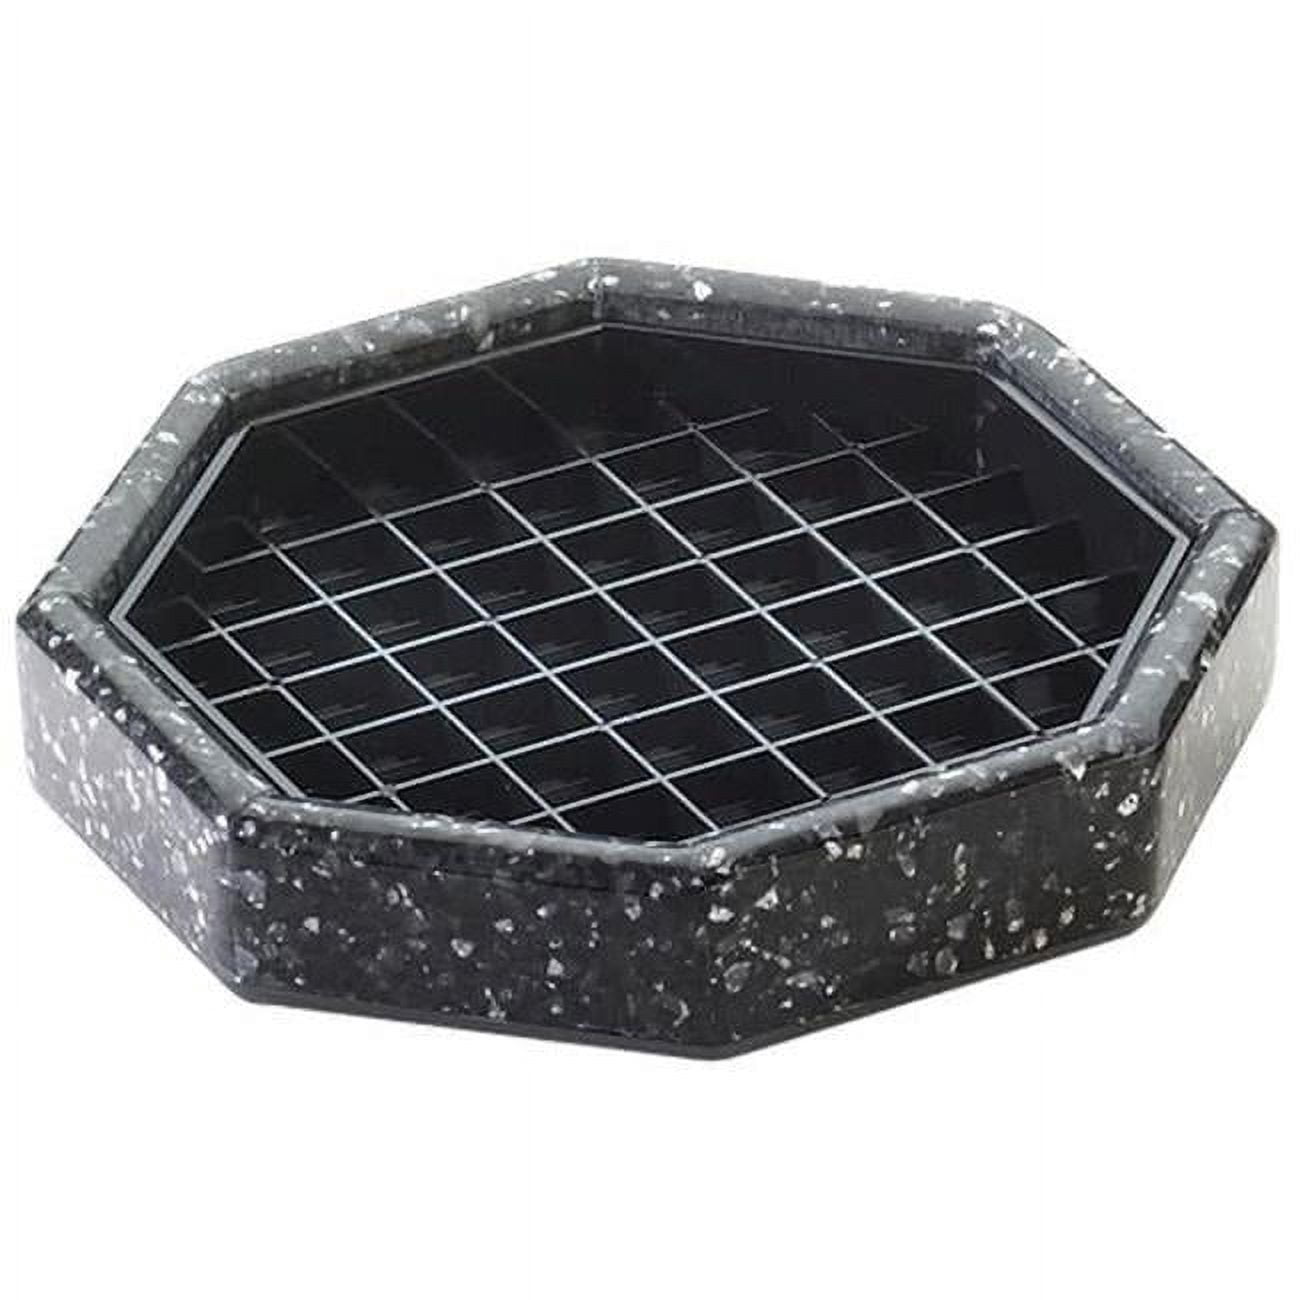 Picture of Cal Mil 310-6-31 Stone Drip Tray 6 x 6 oct - Black Ice